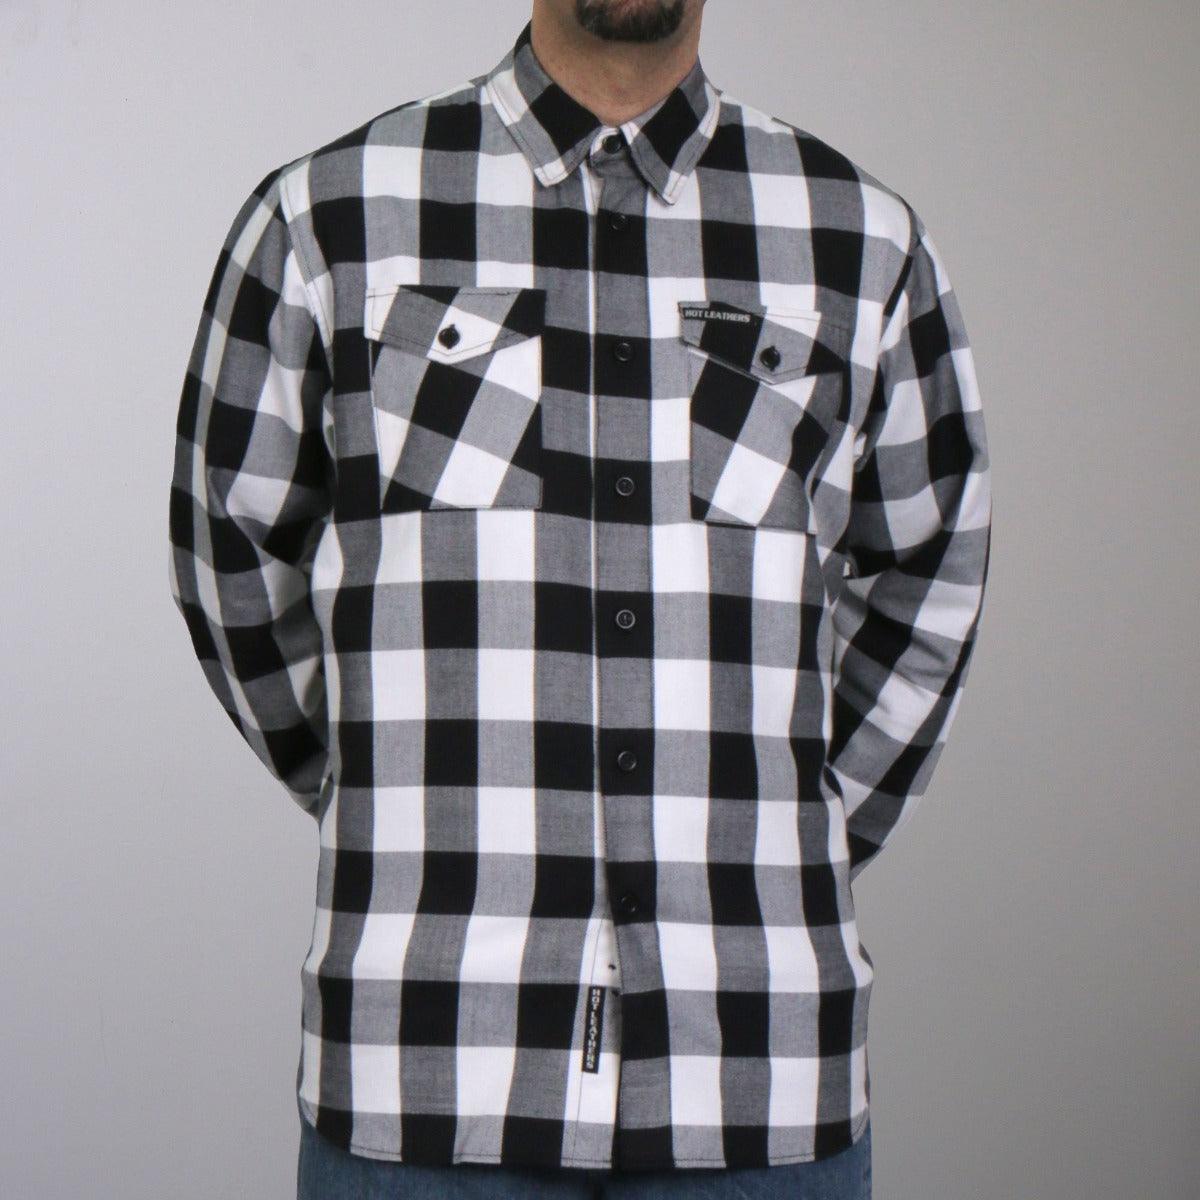 Hot Leathers Men's Black And White Long Sleeve Flannel - American Legend Rider